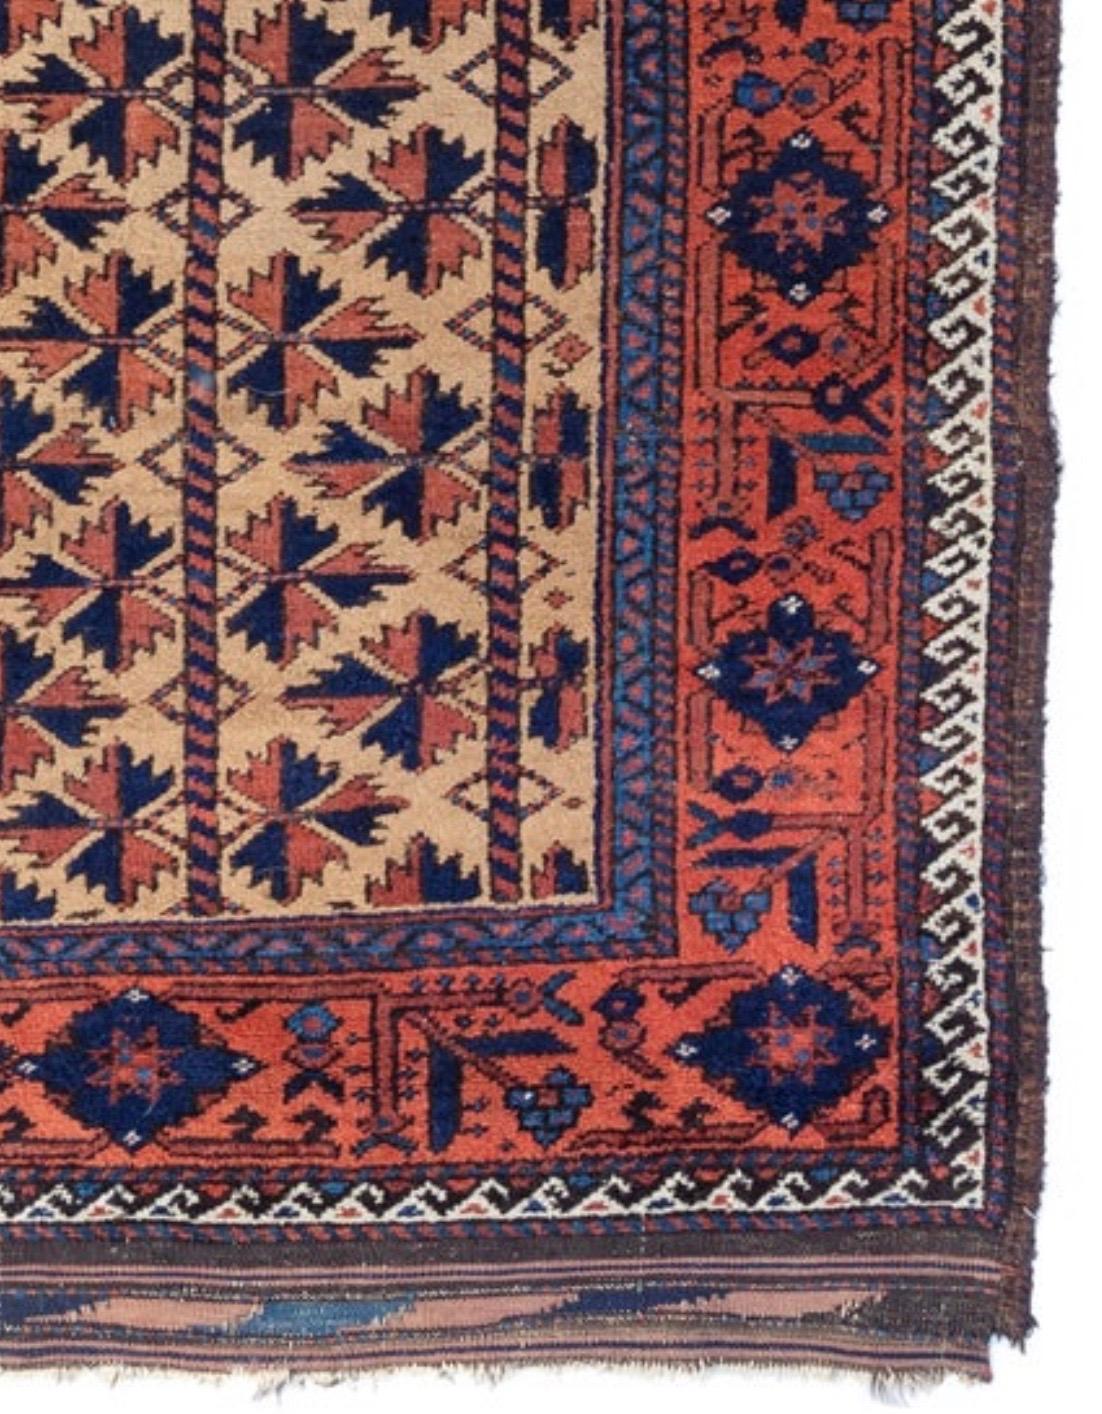 Hand-Woven Antique Caucasian Rust Blue Ivory Geometric Tribal Baluch Rug, circa 1900s-1910s For Sale